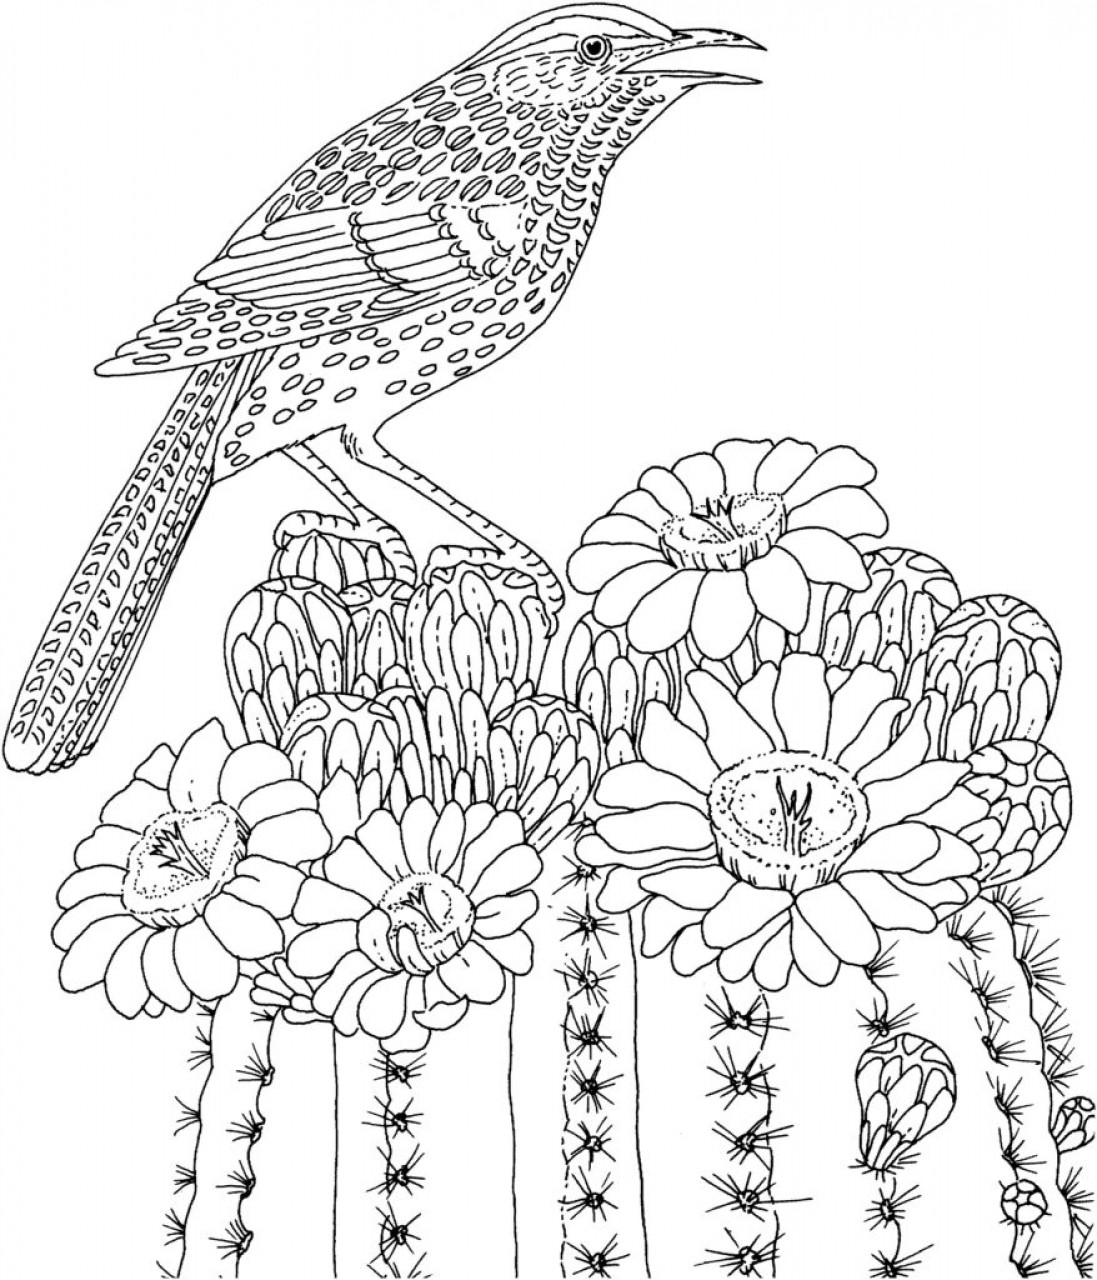 Coloring Pages For Adults Difficult
 Get This Difficult Adult Coloring Pages to Print Out